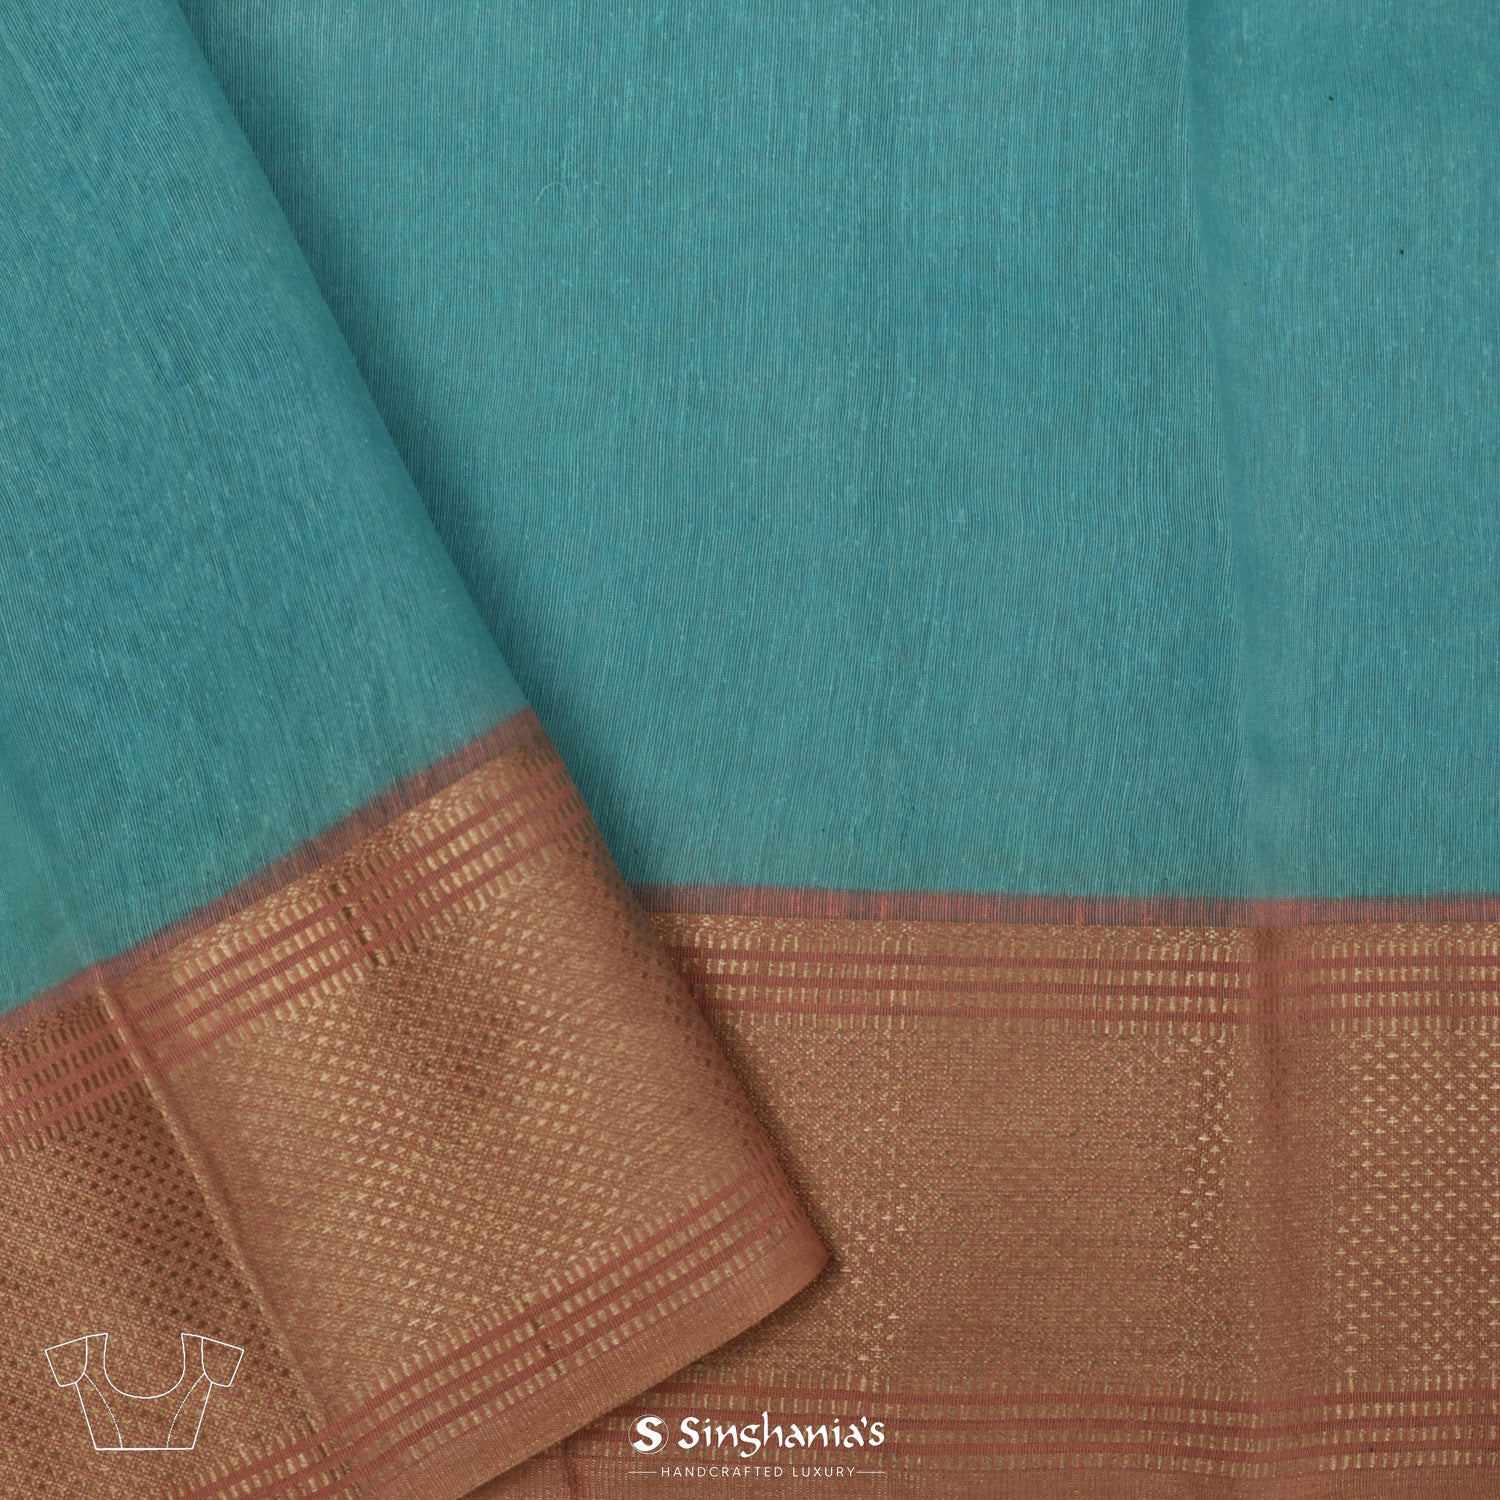 Duck Blue Printed Linen Saree With Floral Pattern